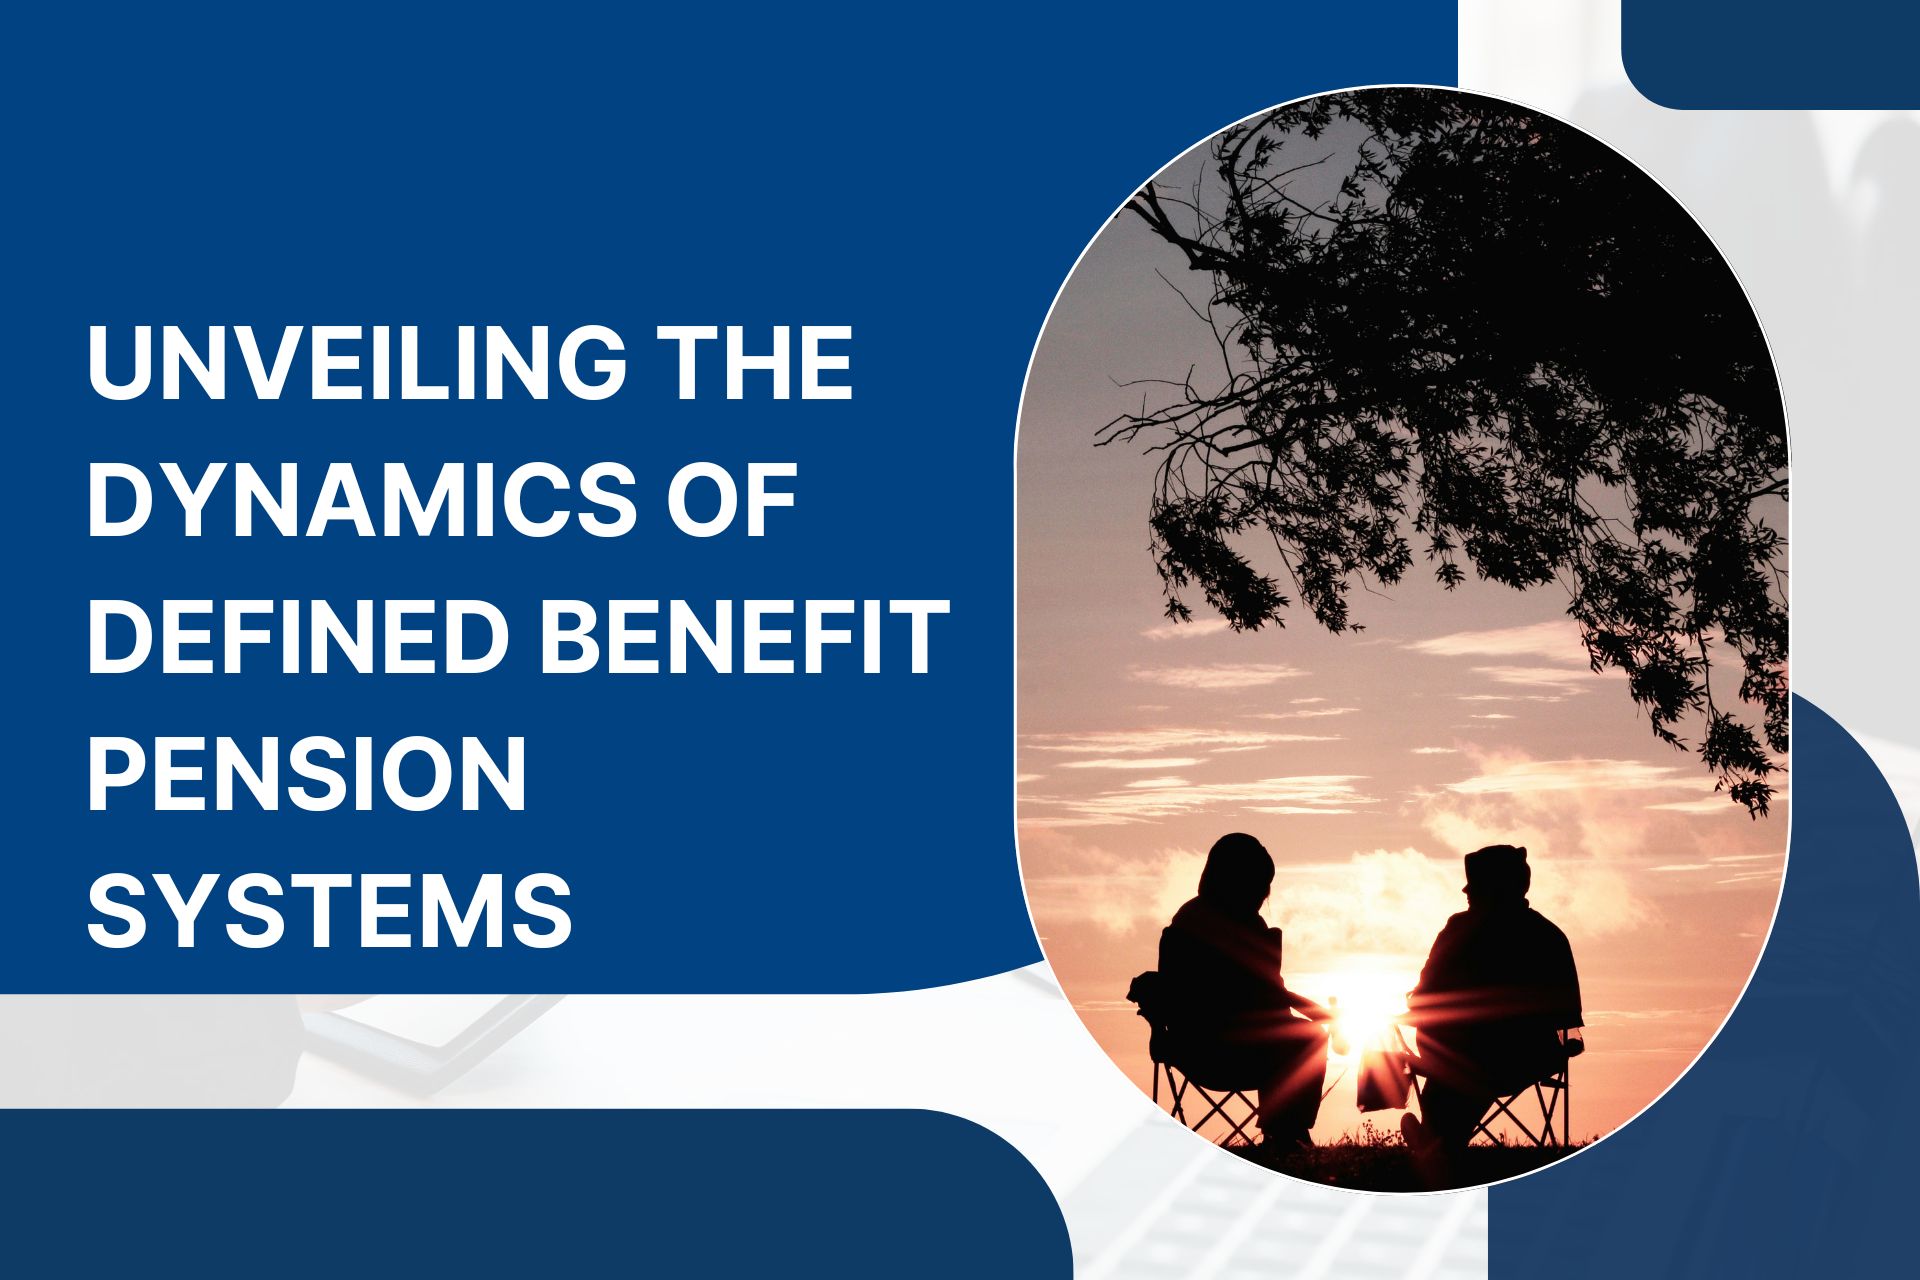 Defined Benefit Pension Systems